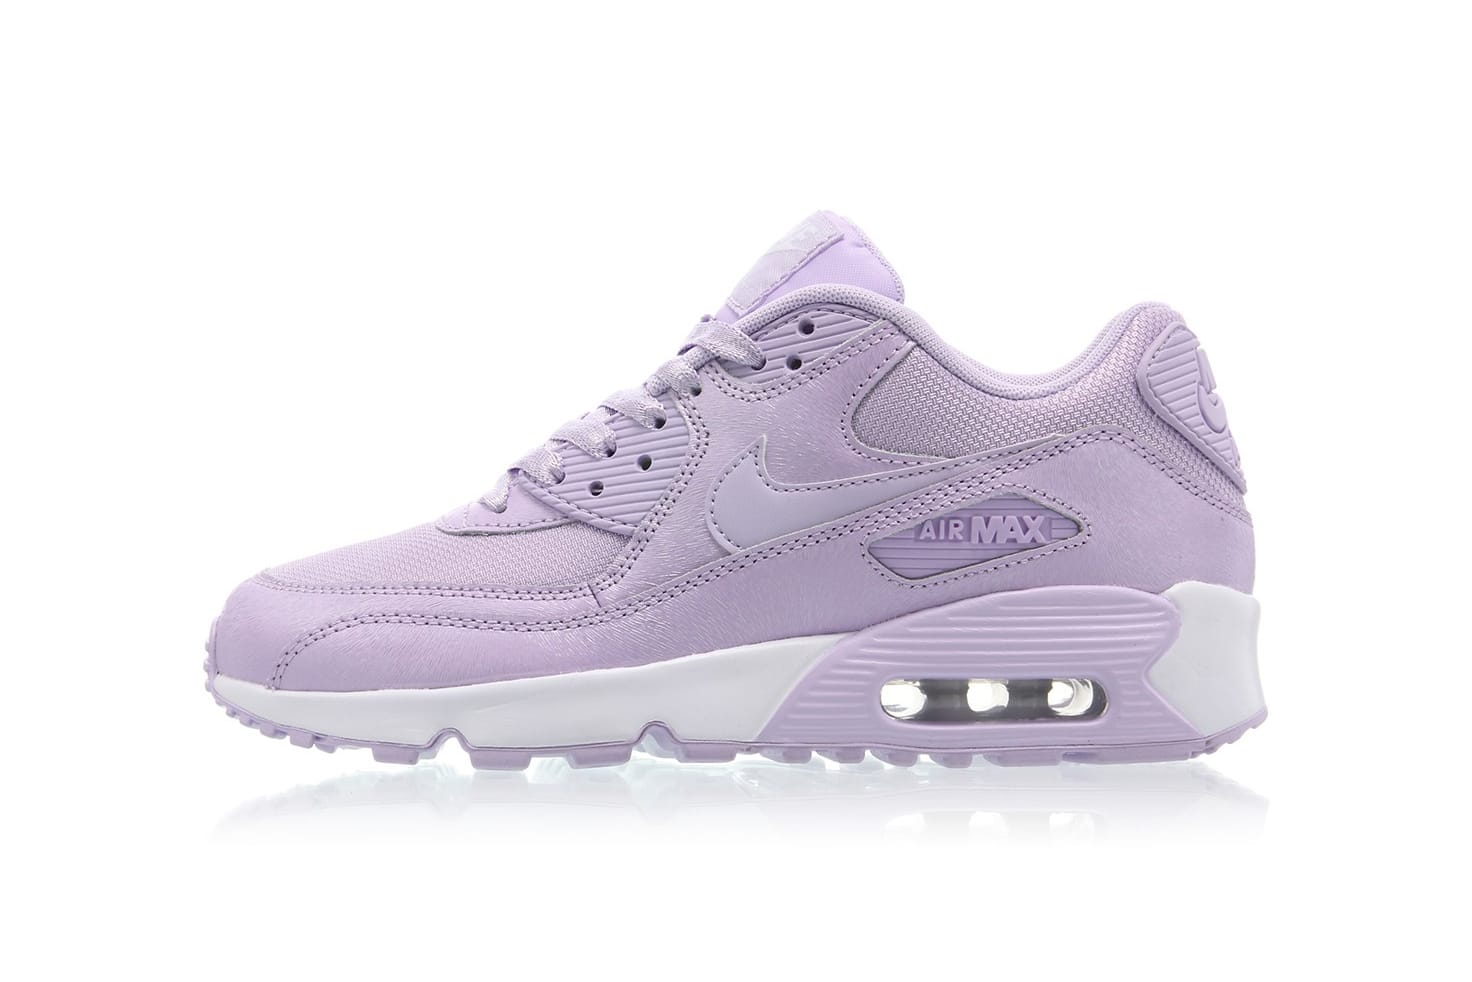 Nike Air Max 90 SE Mesh Releases in 